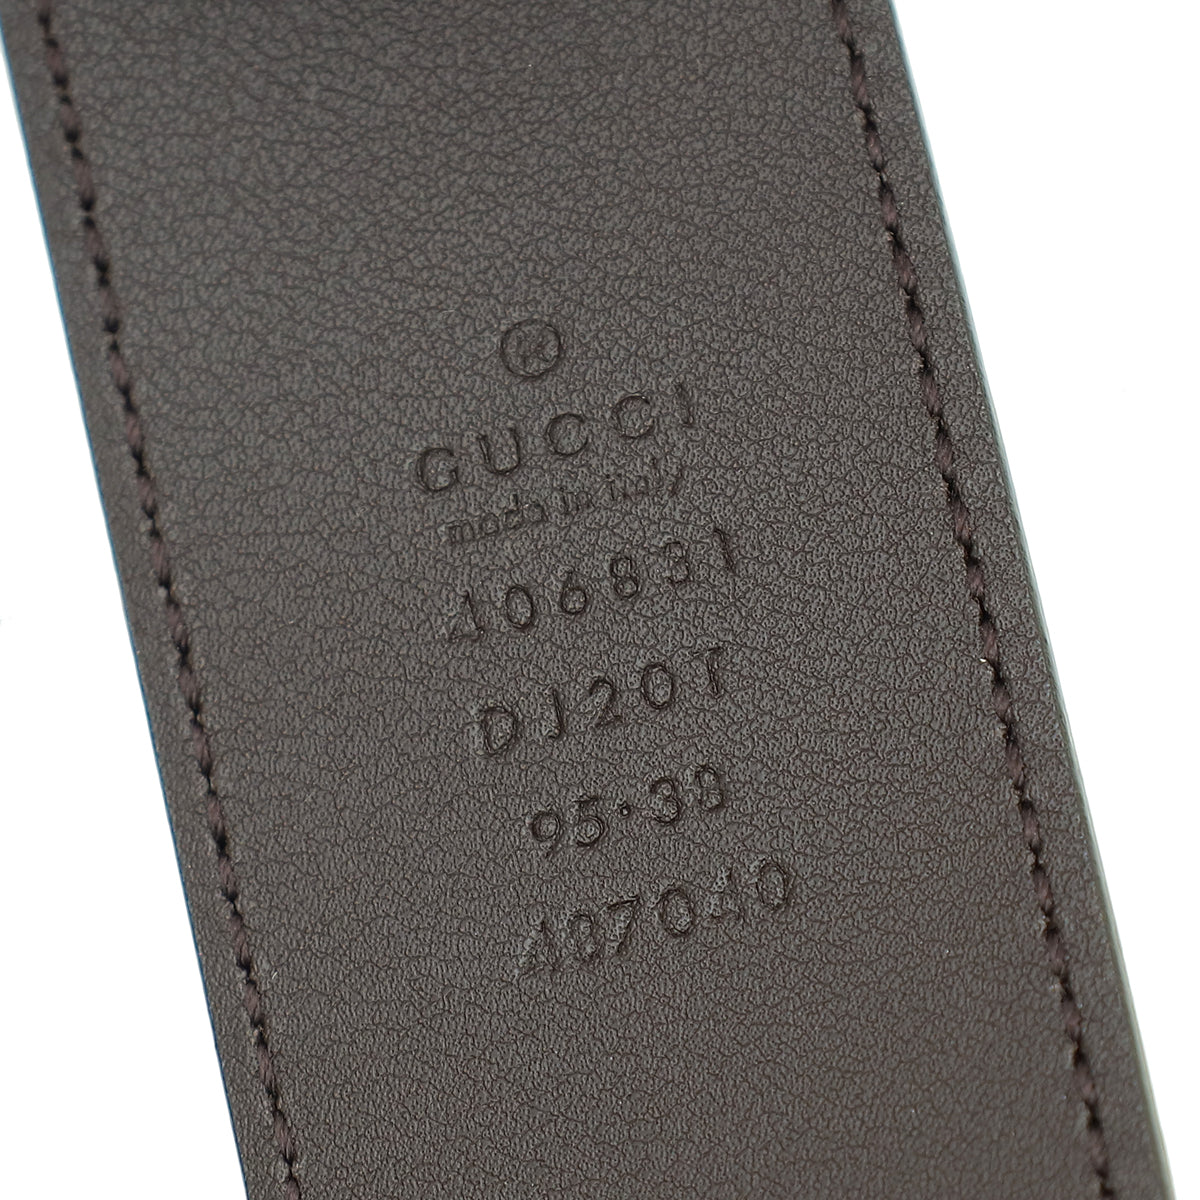 Gucci Chocolate Brown Double G Buckle Belt 38